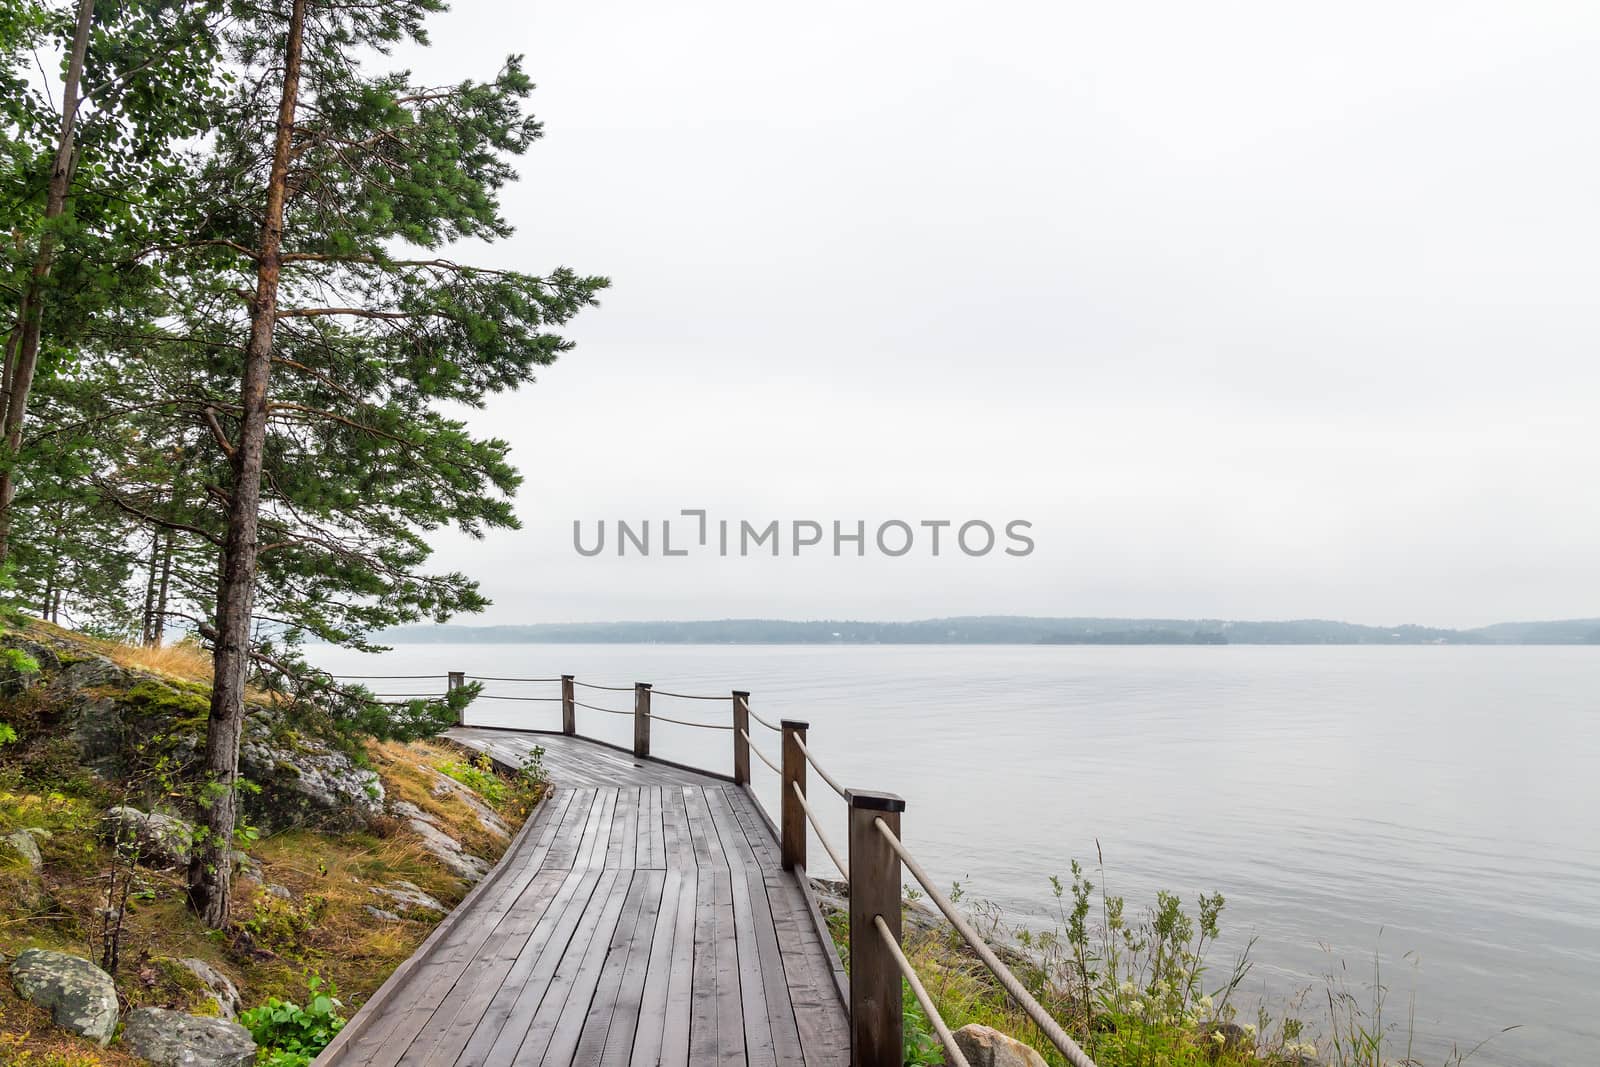 Wooden path going along the calm lake.